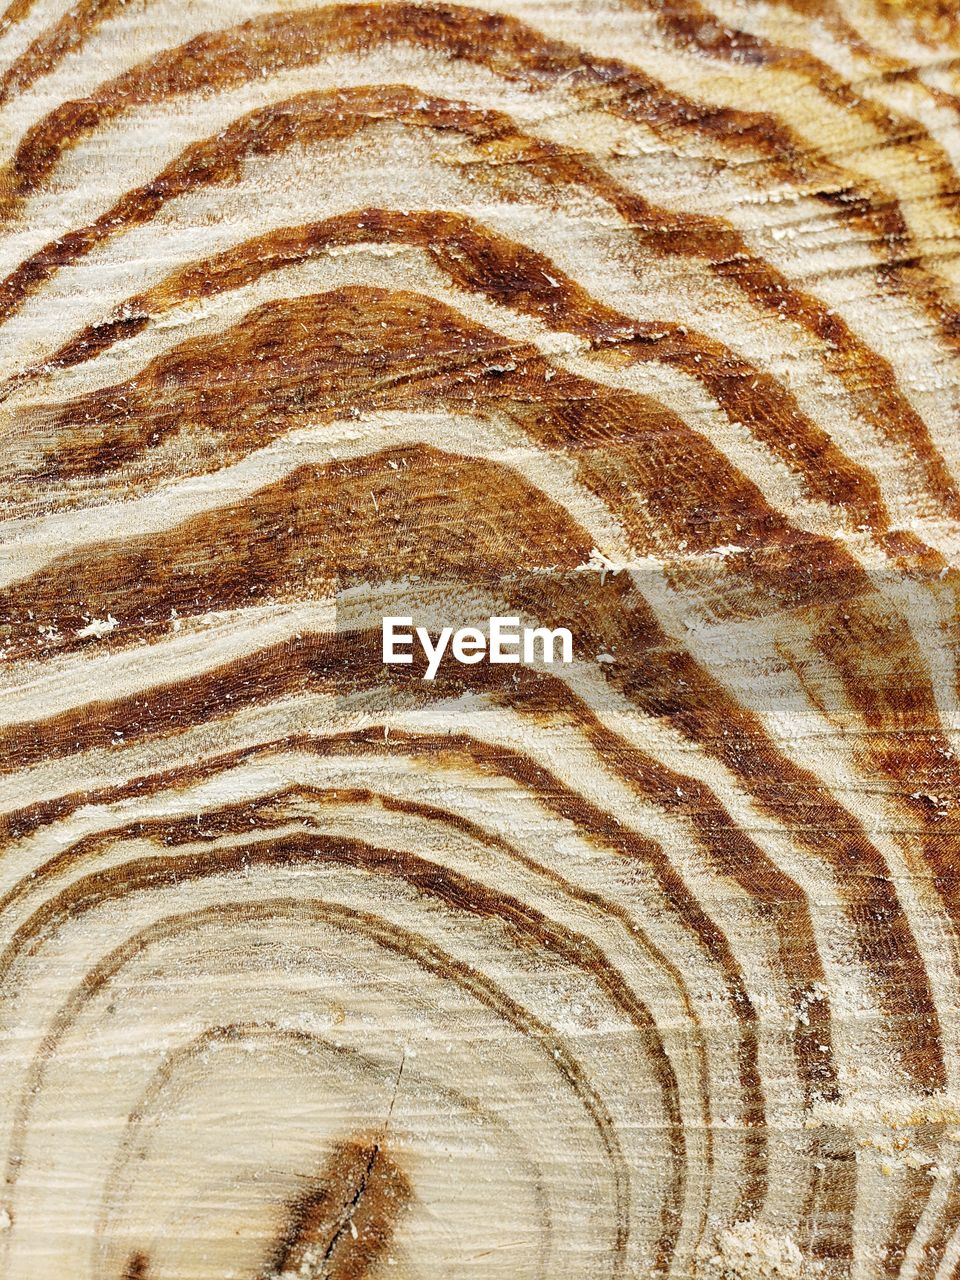 FULL FRAME SHOT OF WOOD WITH TREE